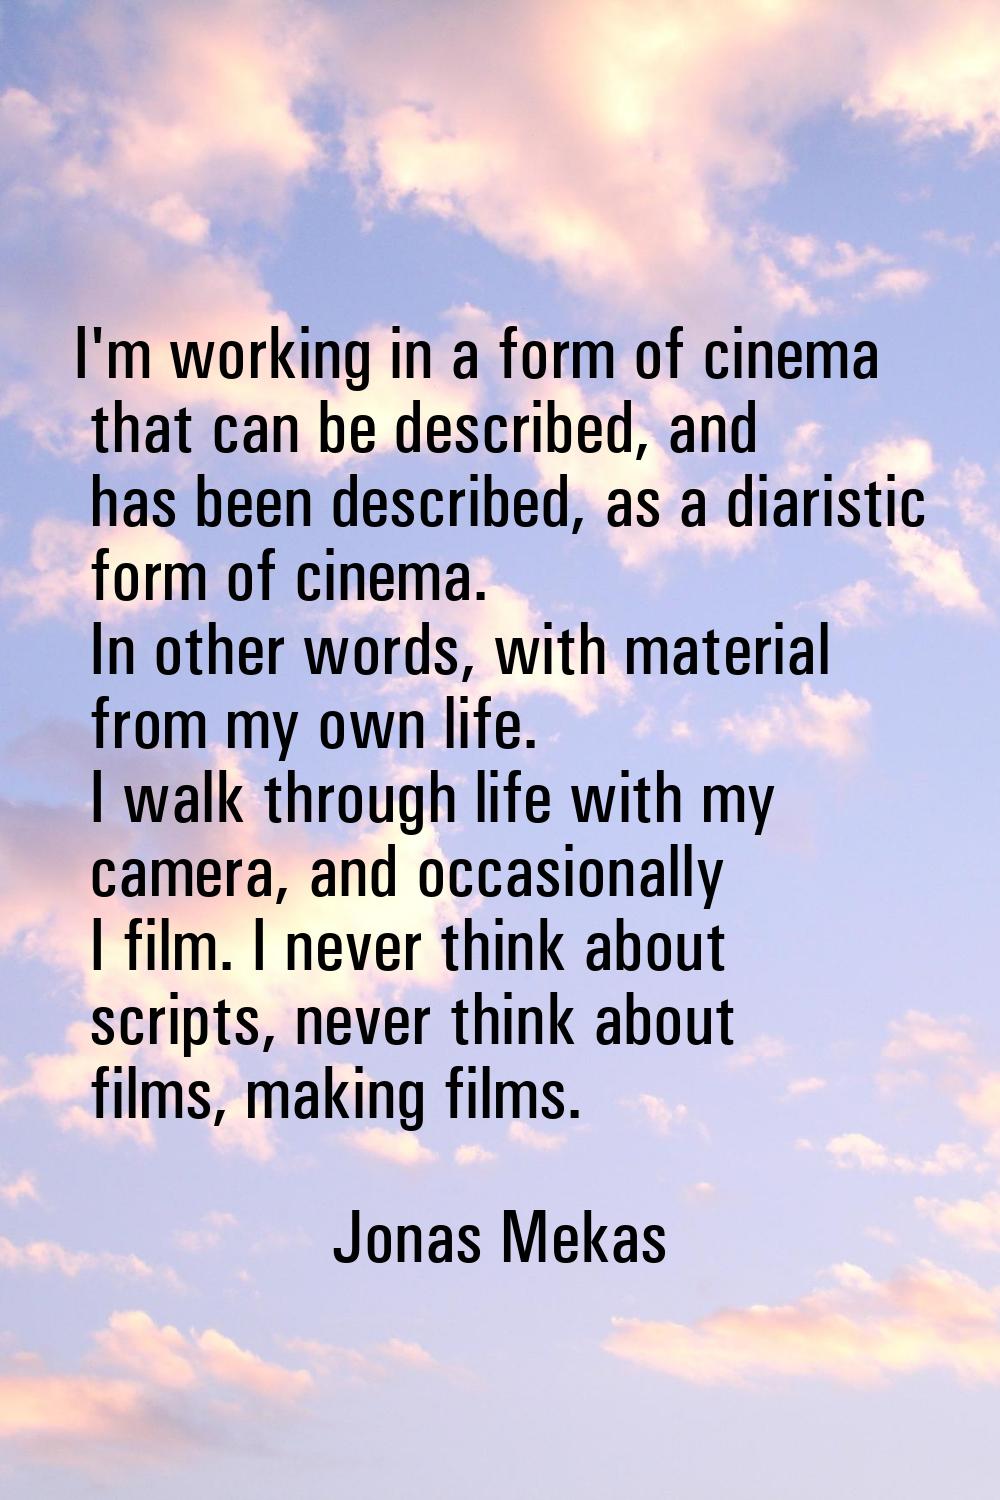 I'm working in a form of cinema that can be described, and has been described, as a diaristic form 